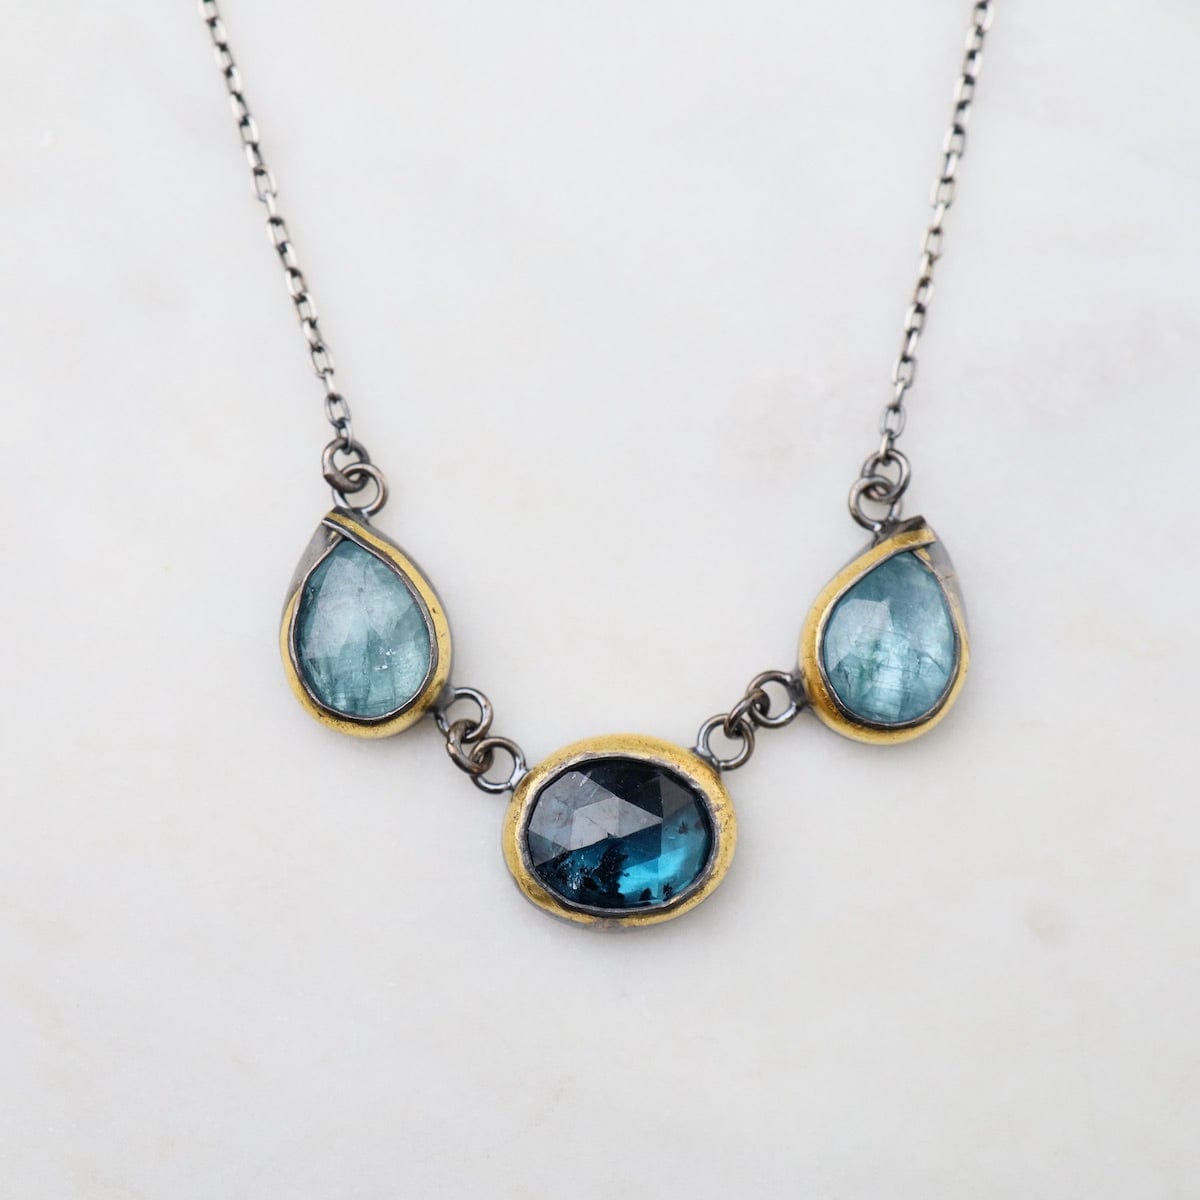 NKL 3 Crescent Rim Necklace with Teal Kyanite & Aquama